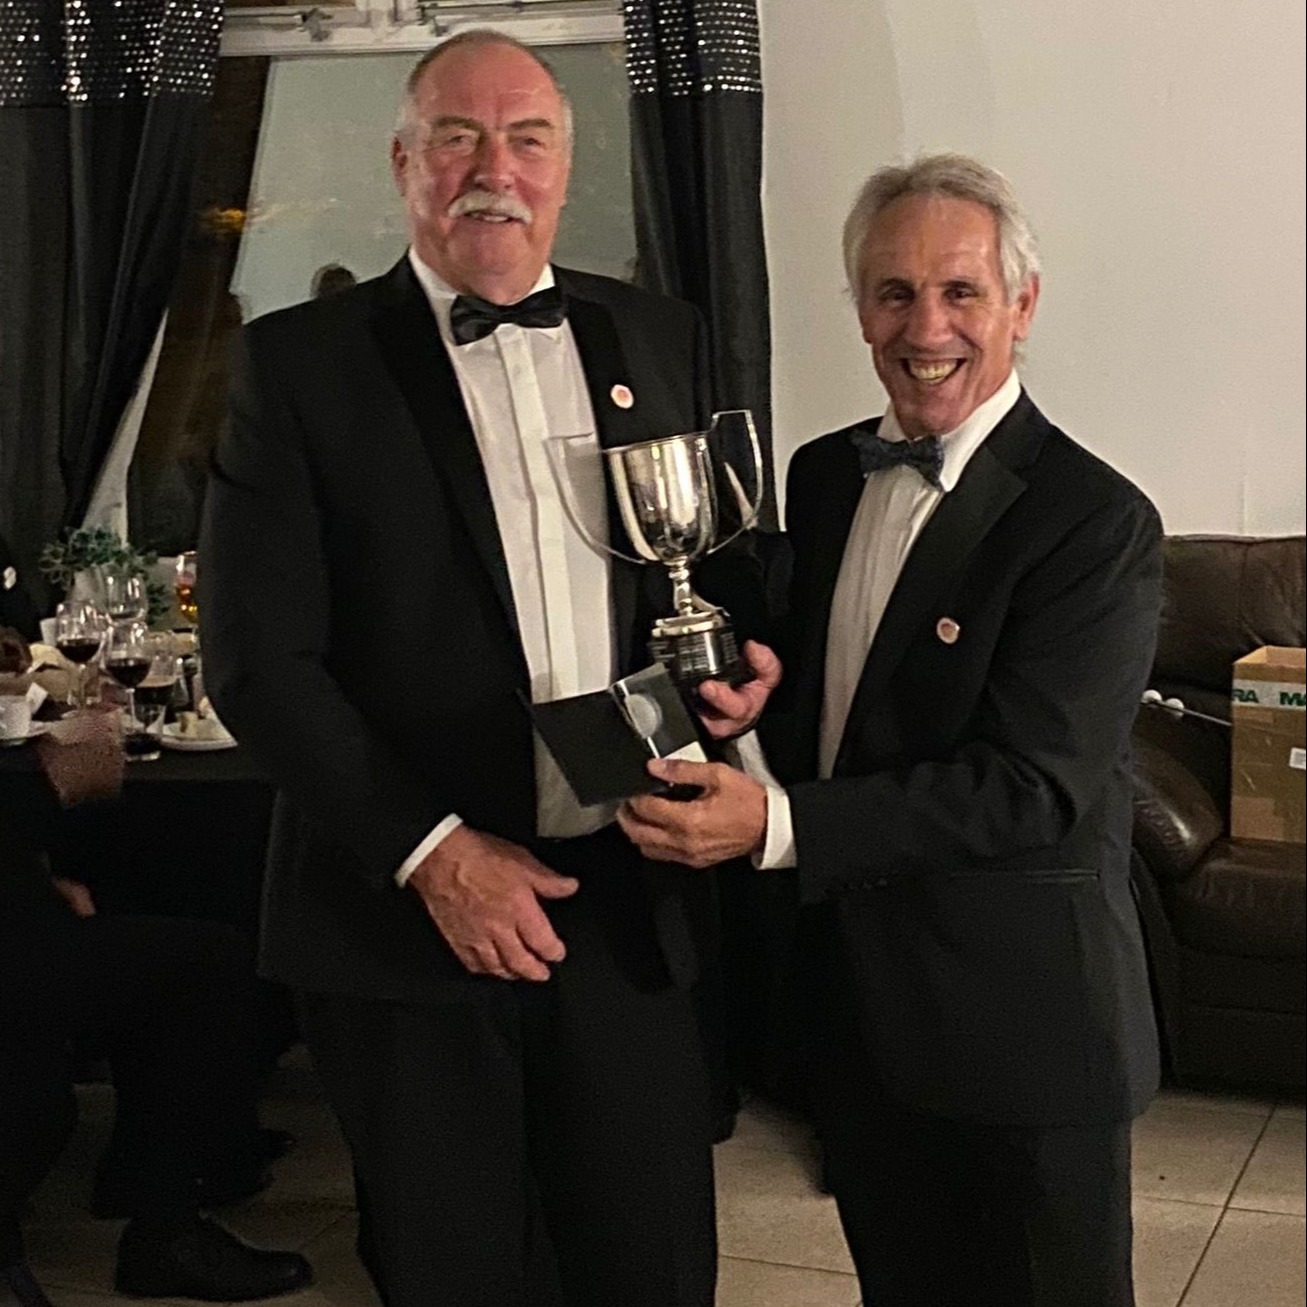 Keith Shirley - After Dinner Cup 2019